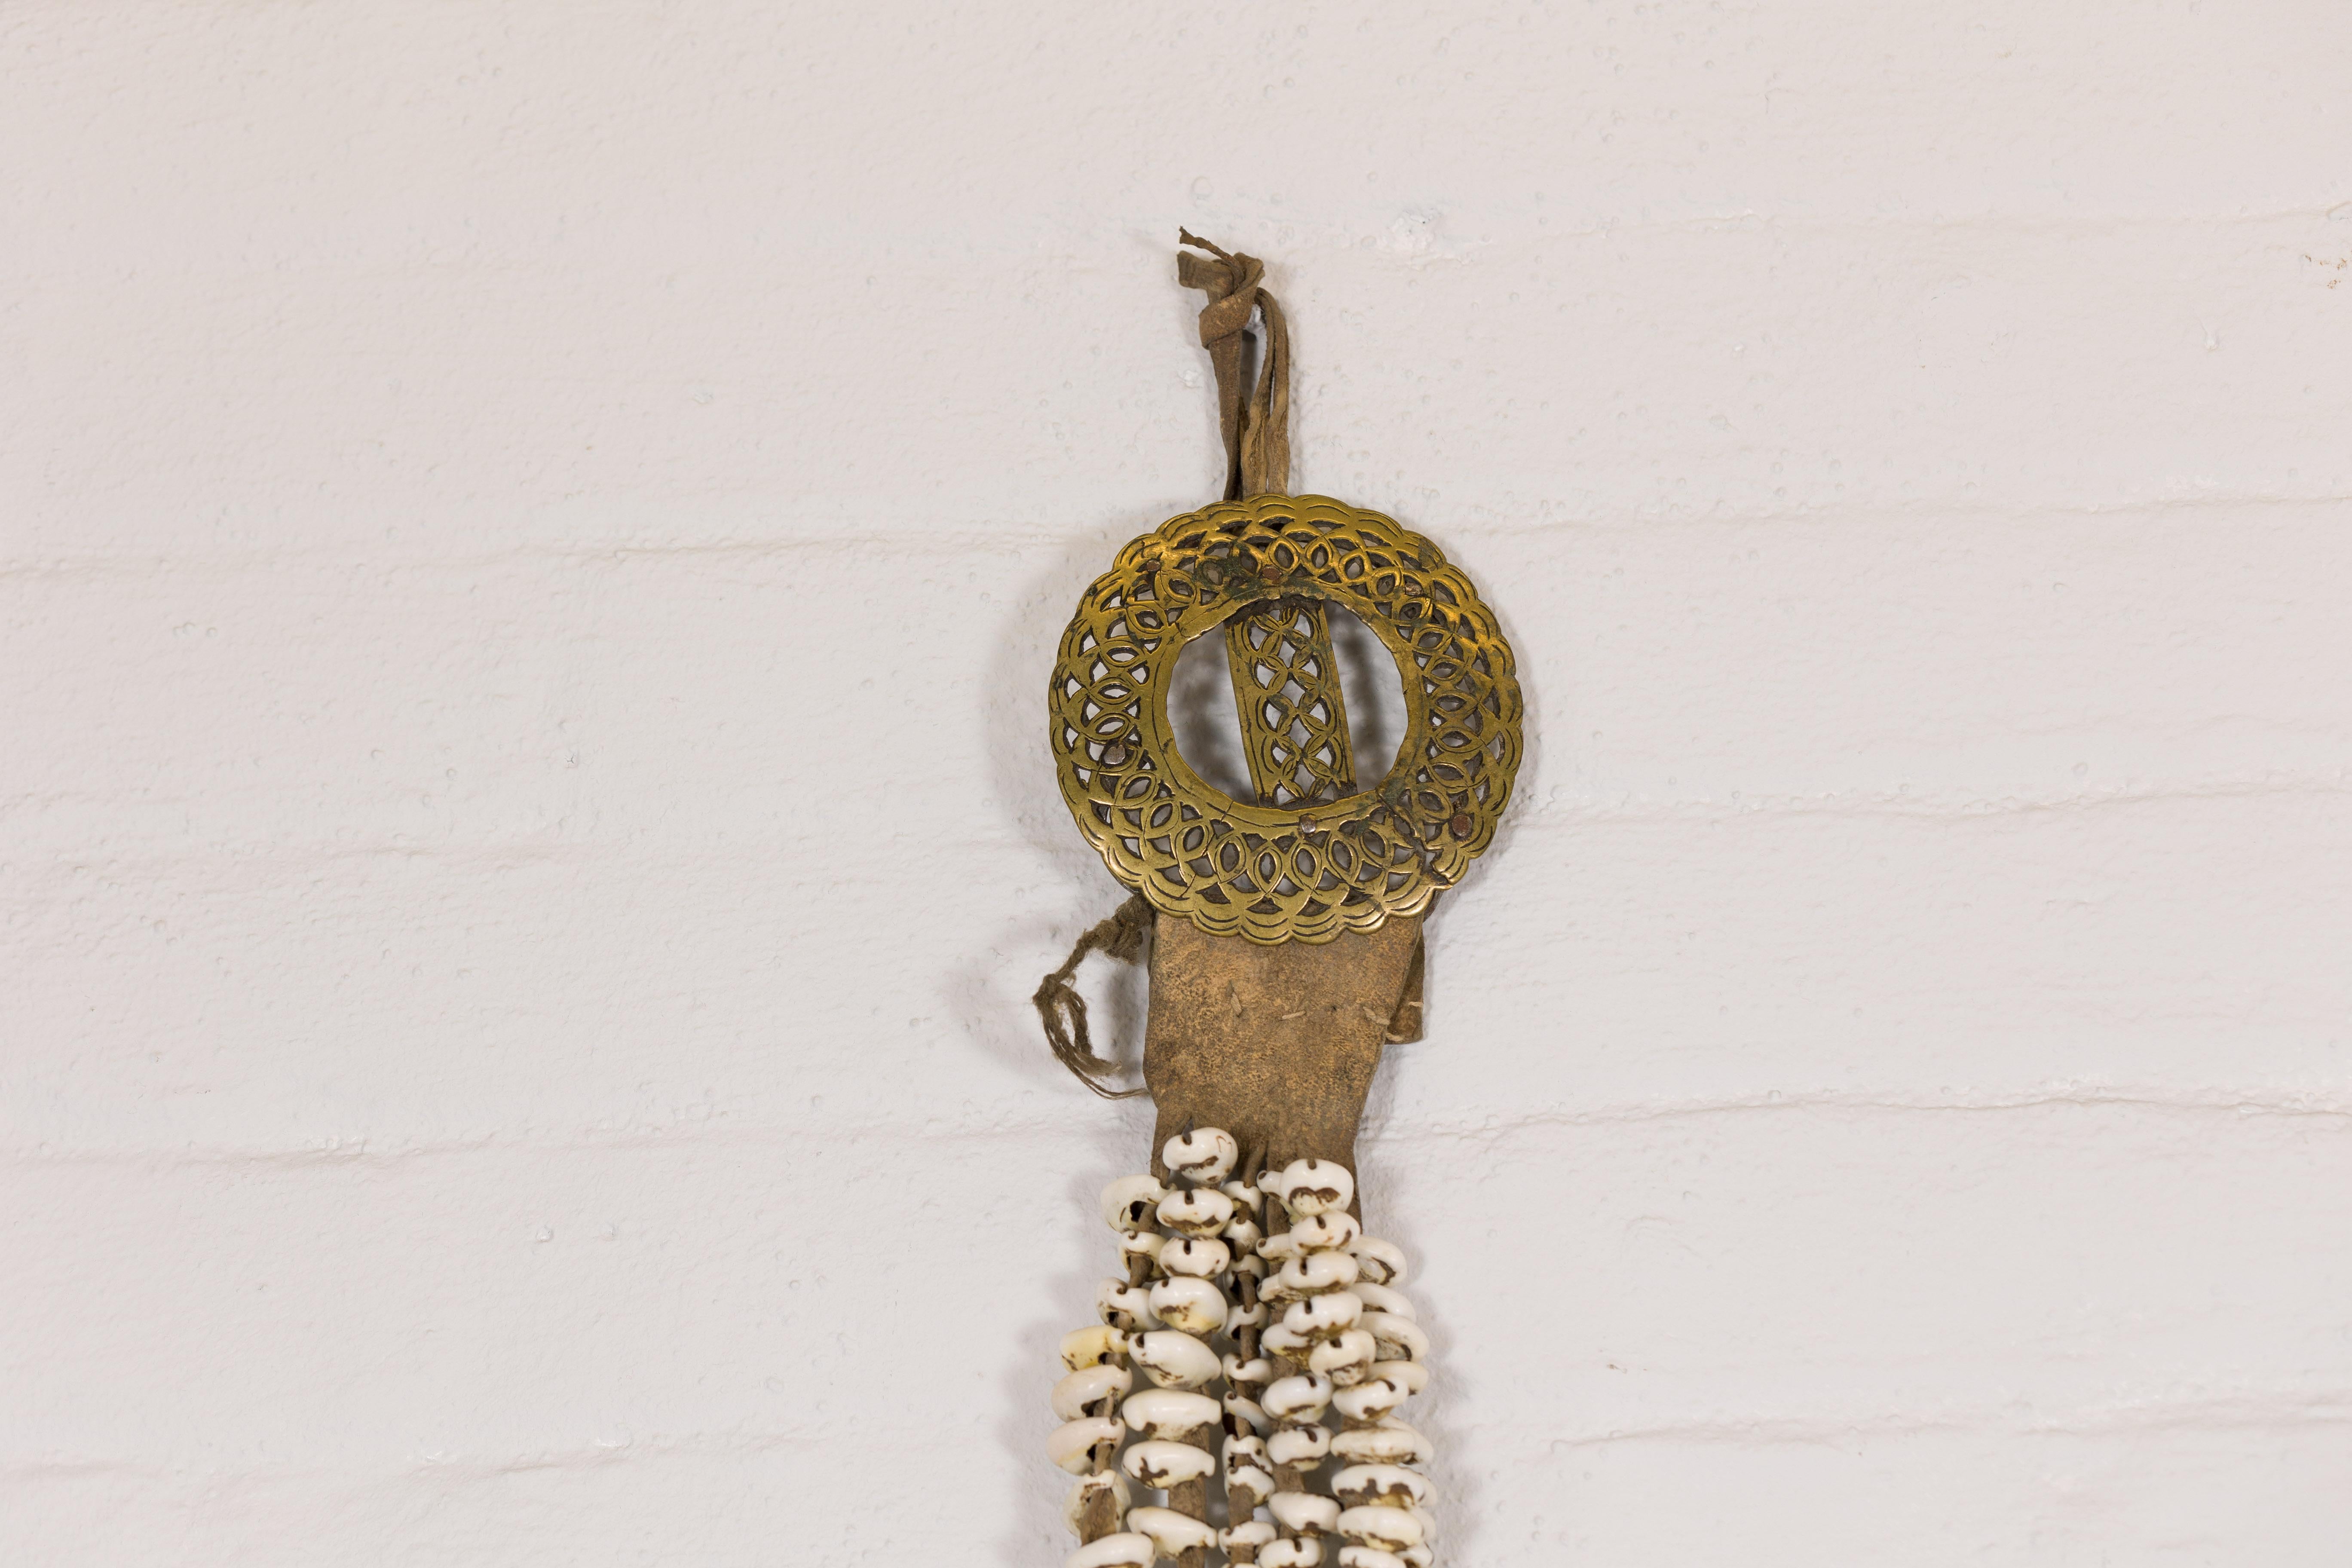 Asian Antique Body Ornament Made of Himalayan Shells Secured to a Brass Buckle For Sale